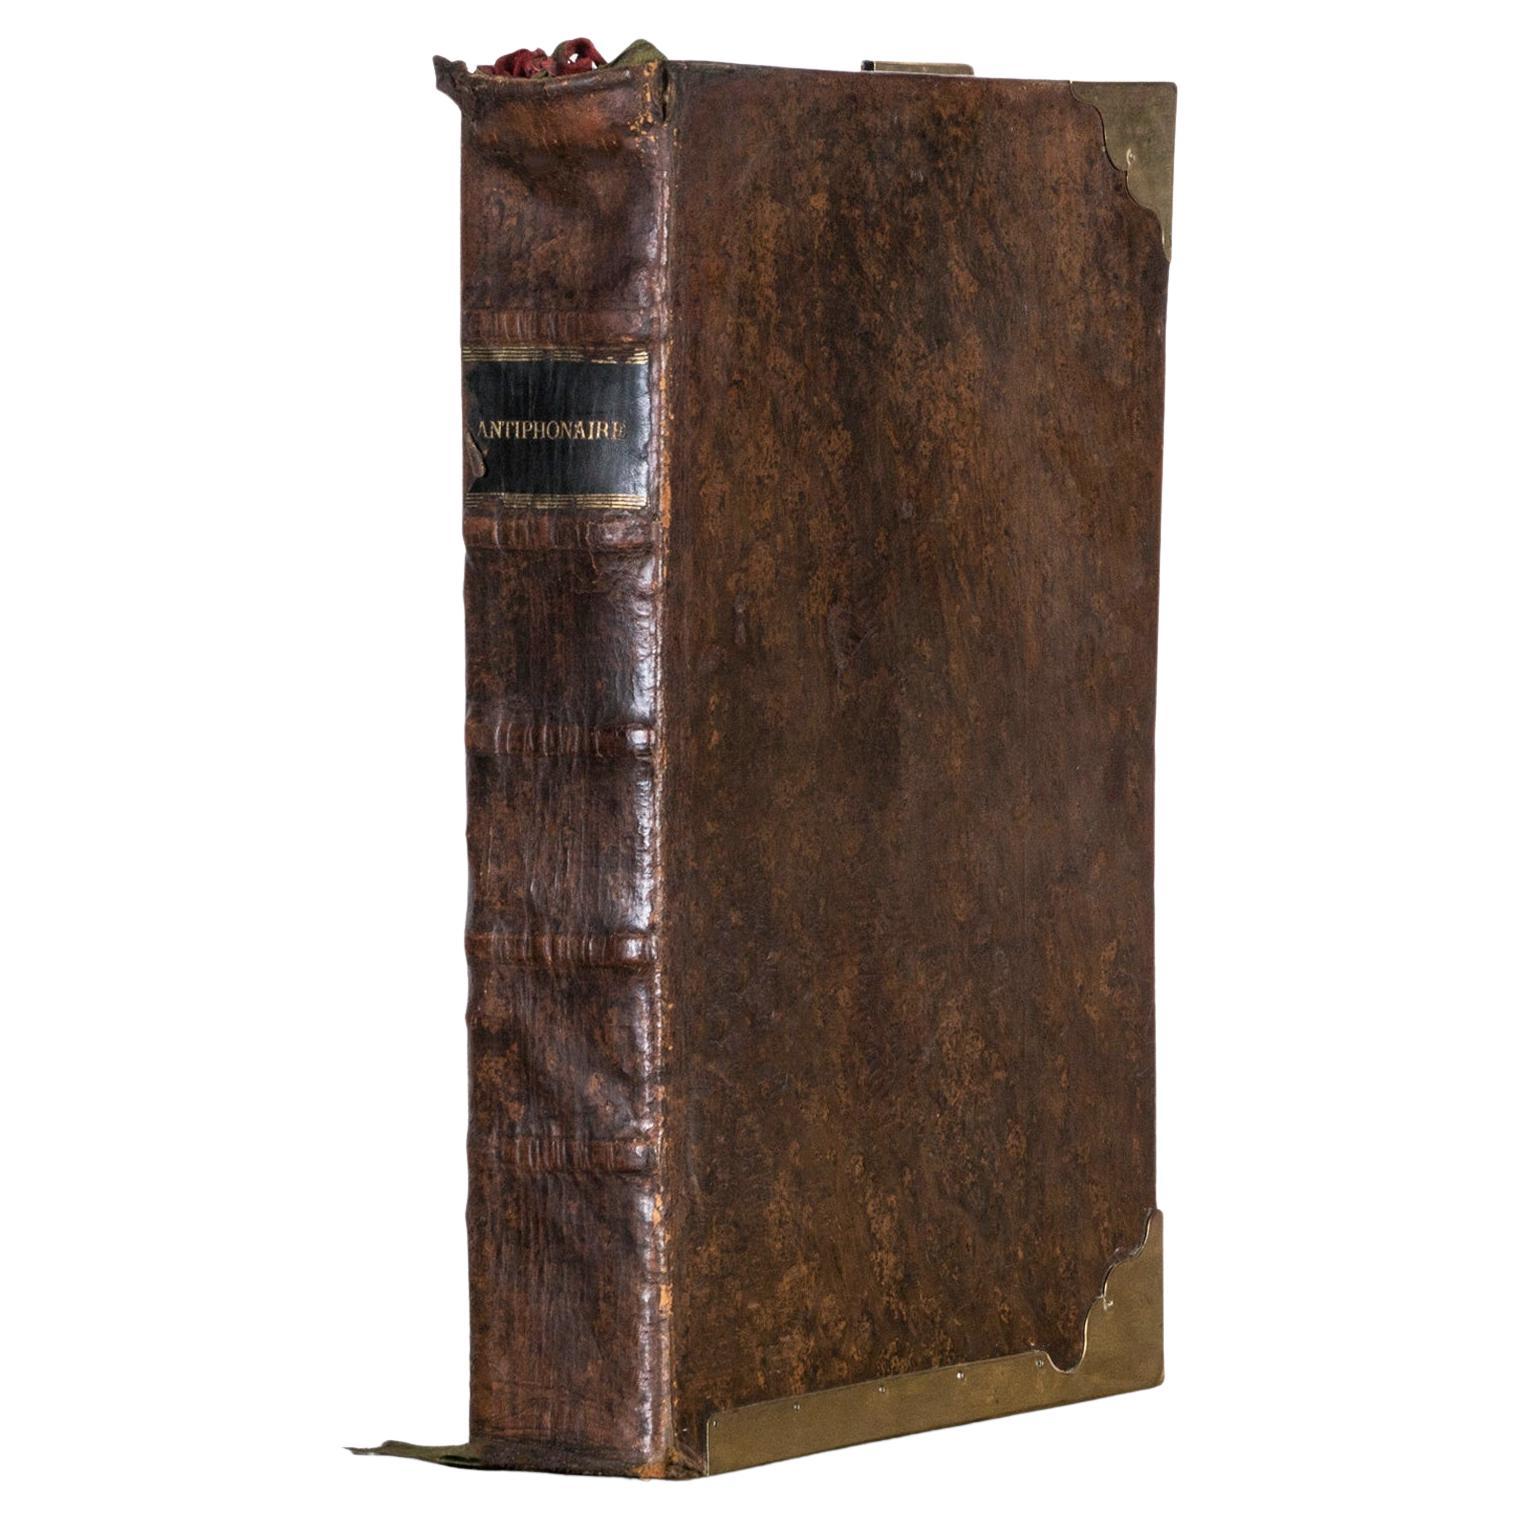 Large Antique Roman Hymnal or Song Book “Antiphonaire”, 1862  